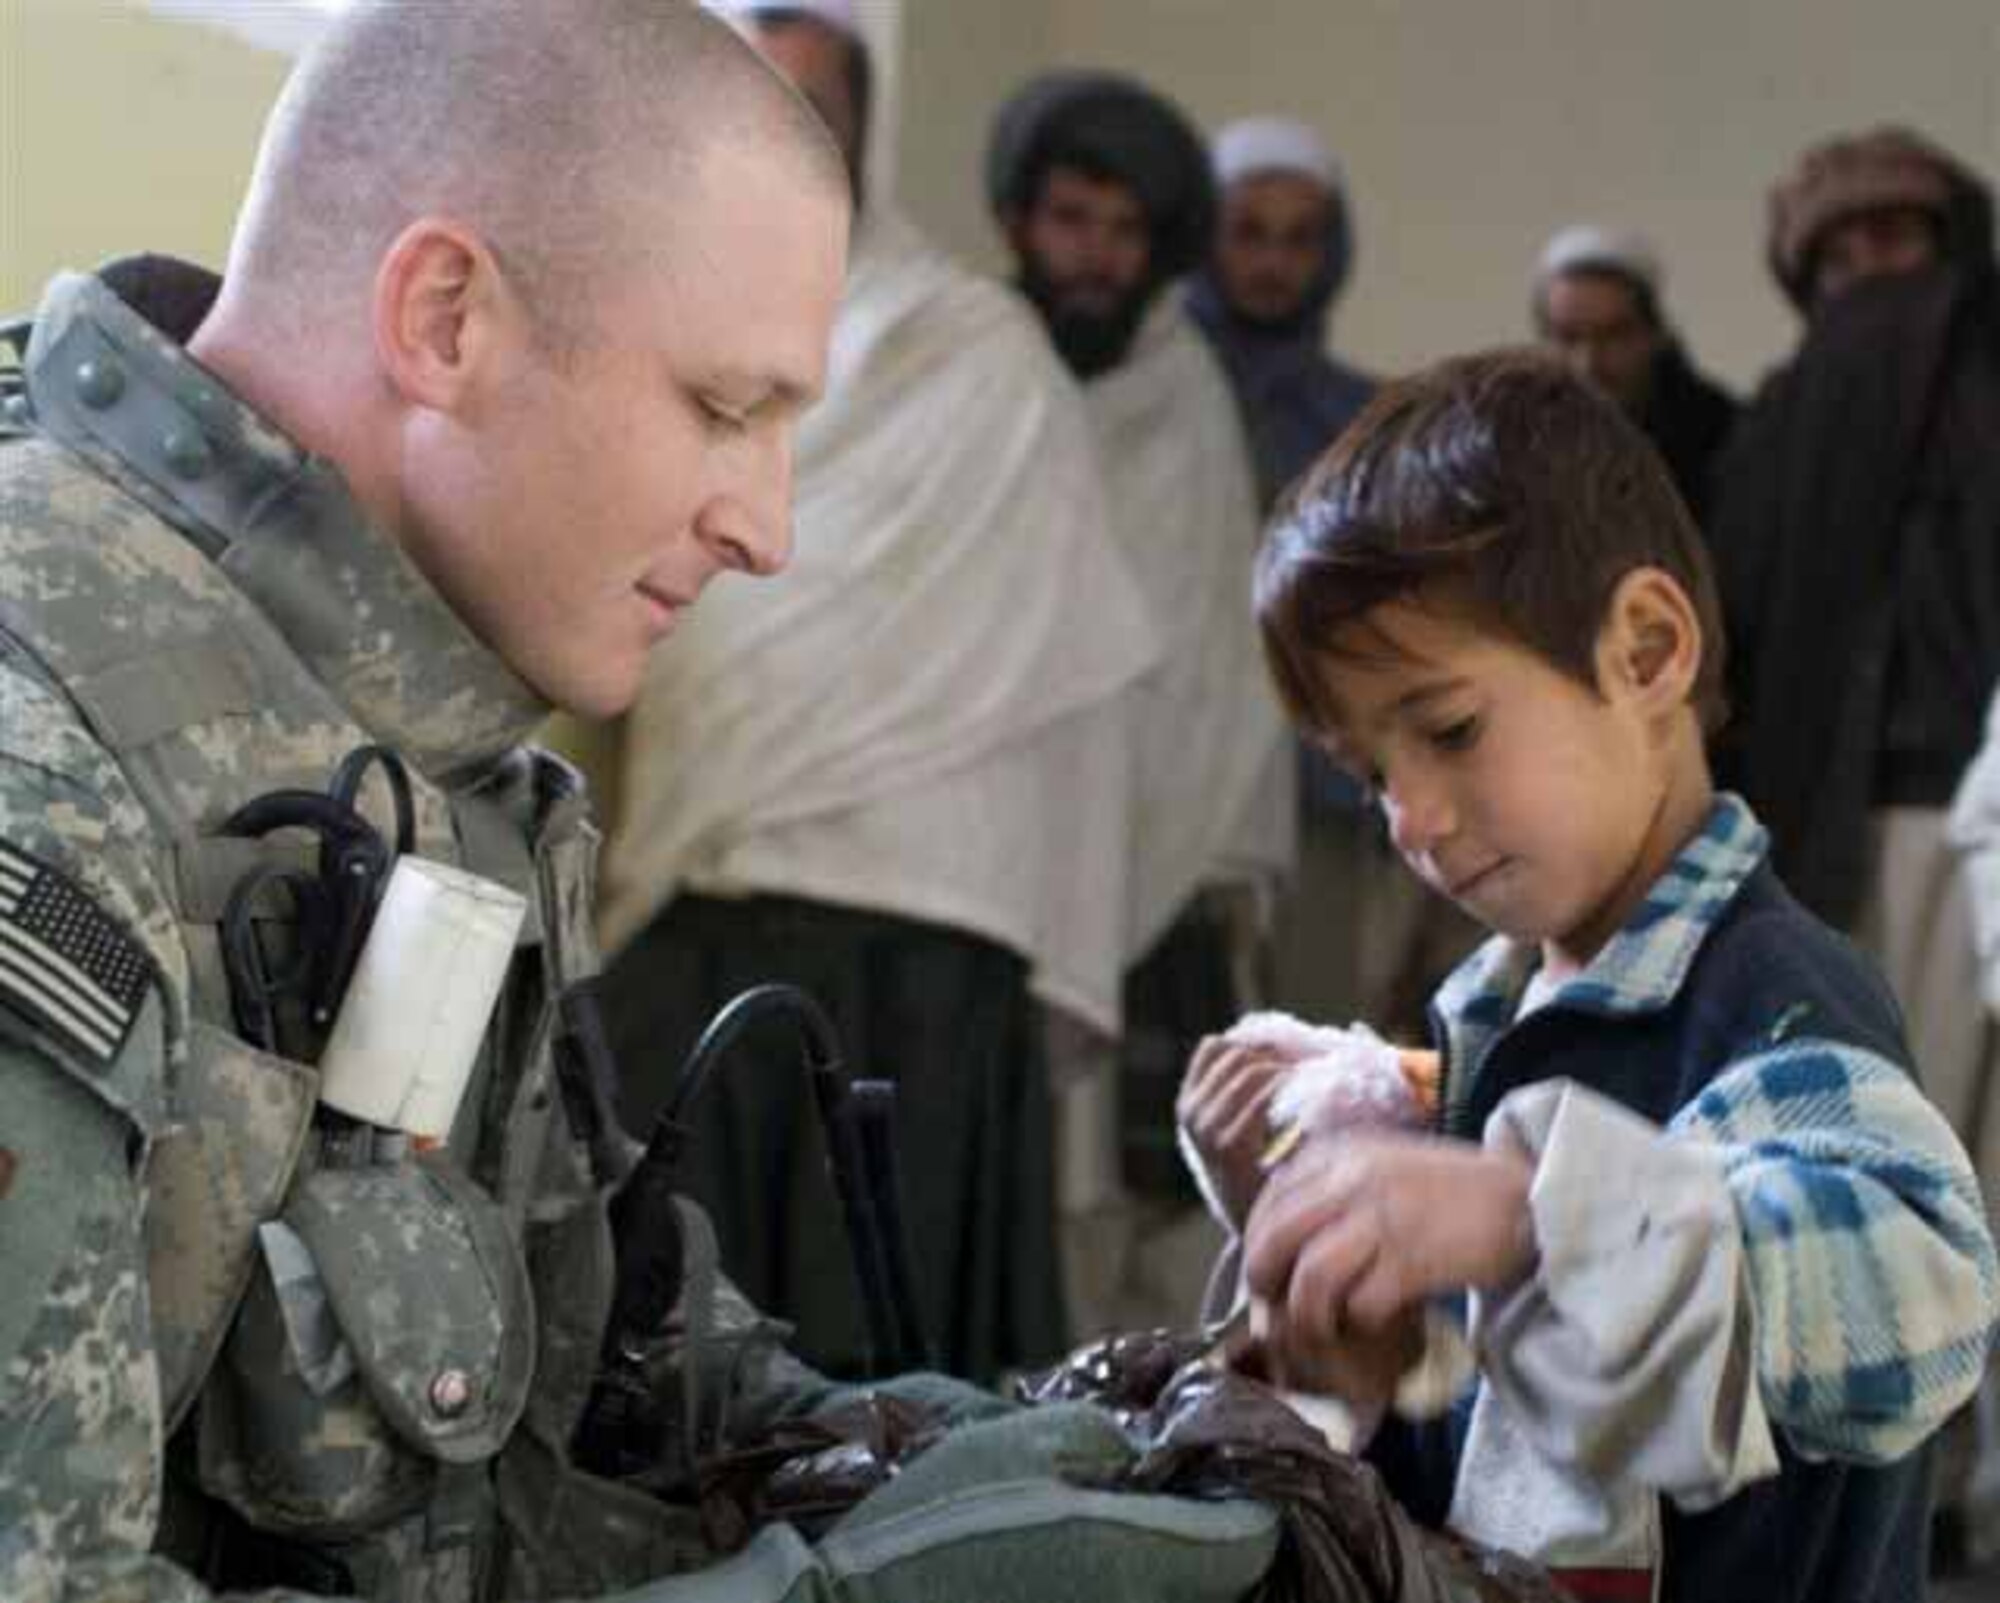 Tech. Sgt. Brandon Bowen, 72nd Medical Group, helps hand out food to refugees while on a humanitarian assistance mission.  Sergeant Bowen is currently deployed with the Army in support of Operation Eduring Freedom.  (Courtesy photo)